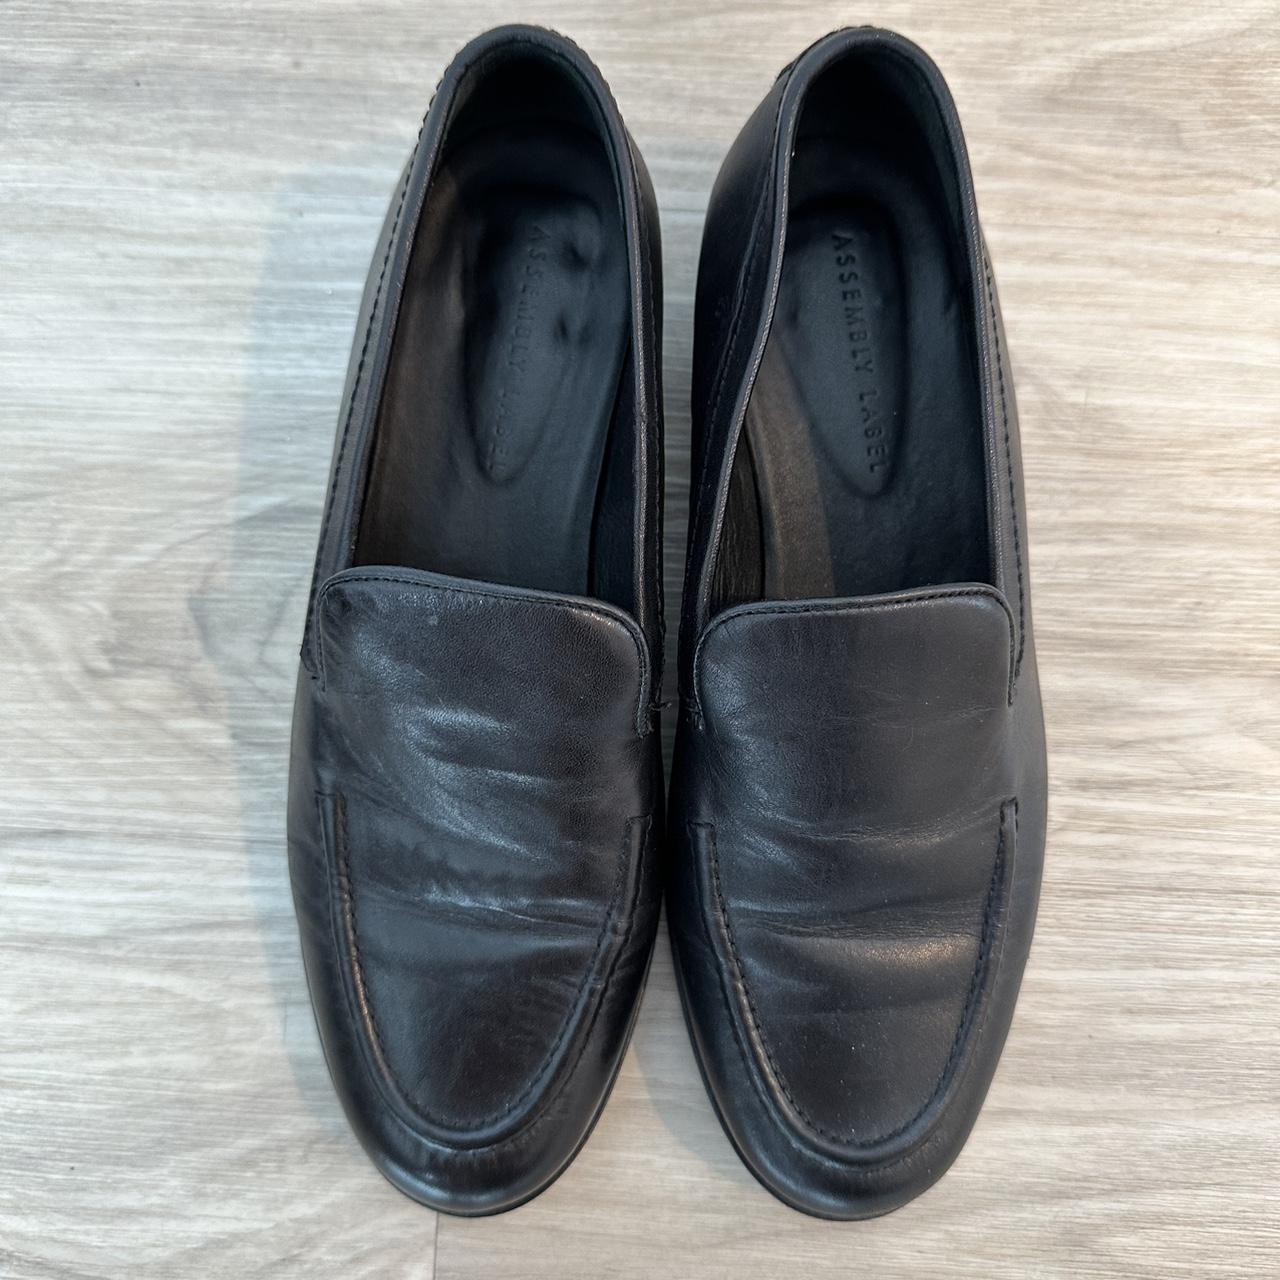 Assembly Label Loafers Genuine leather, in great... - Depop